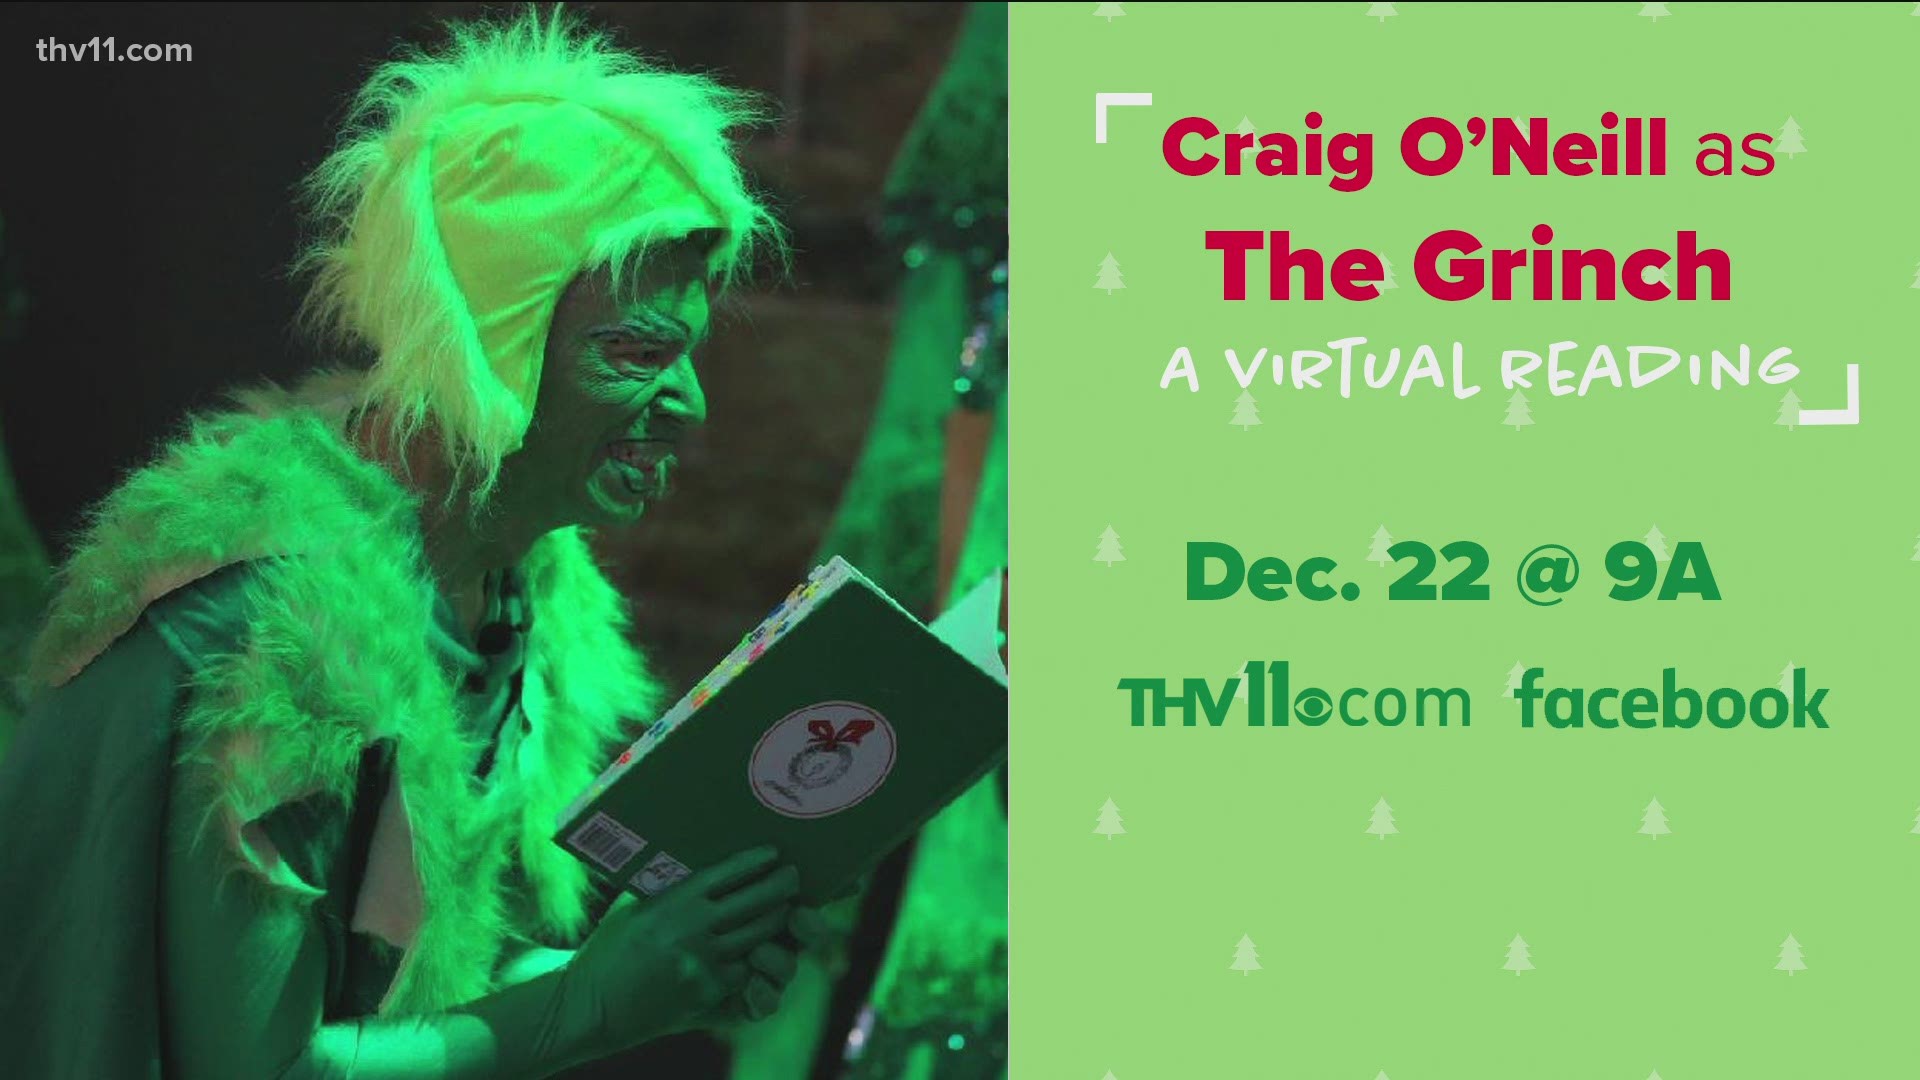 Craig O'Neill is transforming into the Grinch for a special reading of 'How the Grinch Stole Christmas!' on Tuesday, Dec. 22.